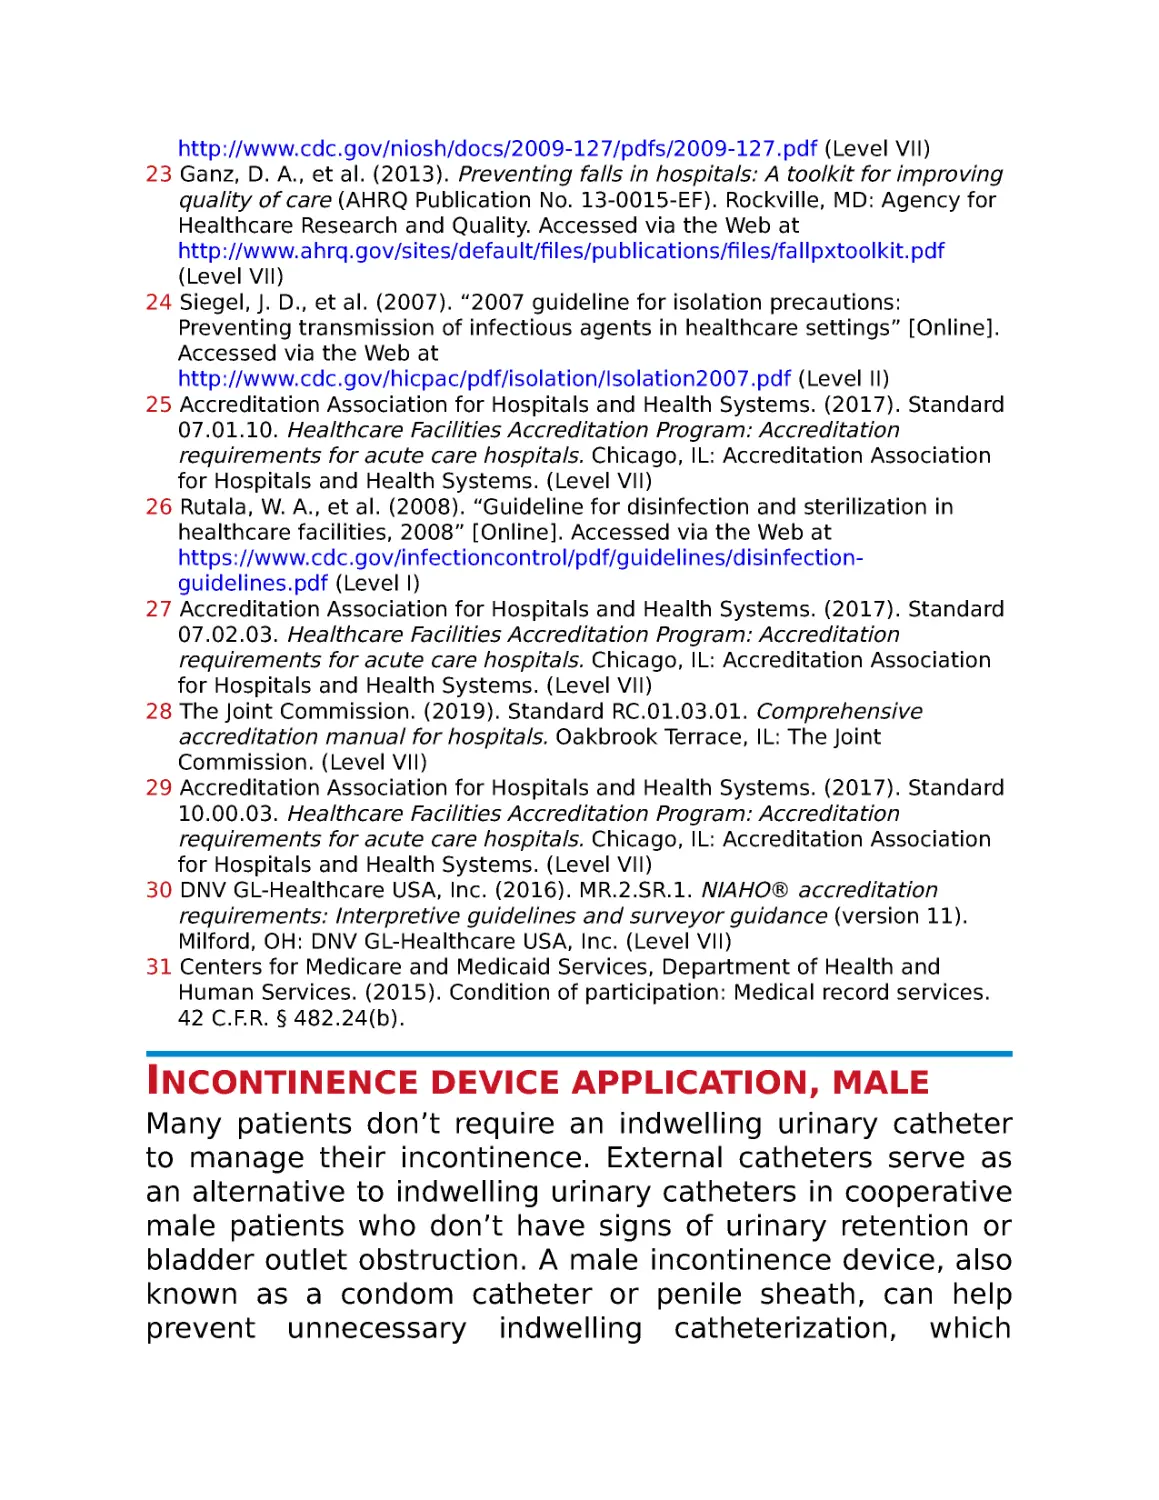 Incontinence device application, male